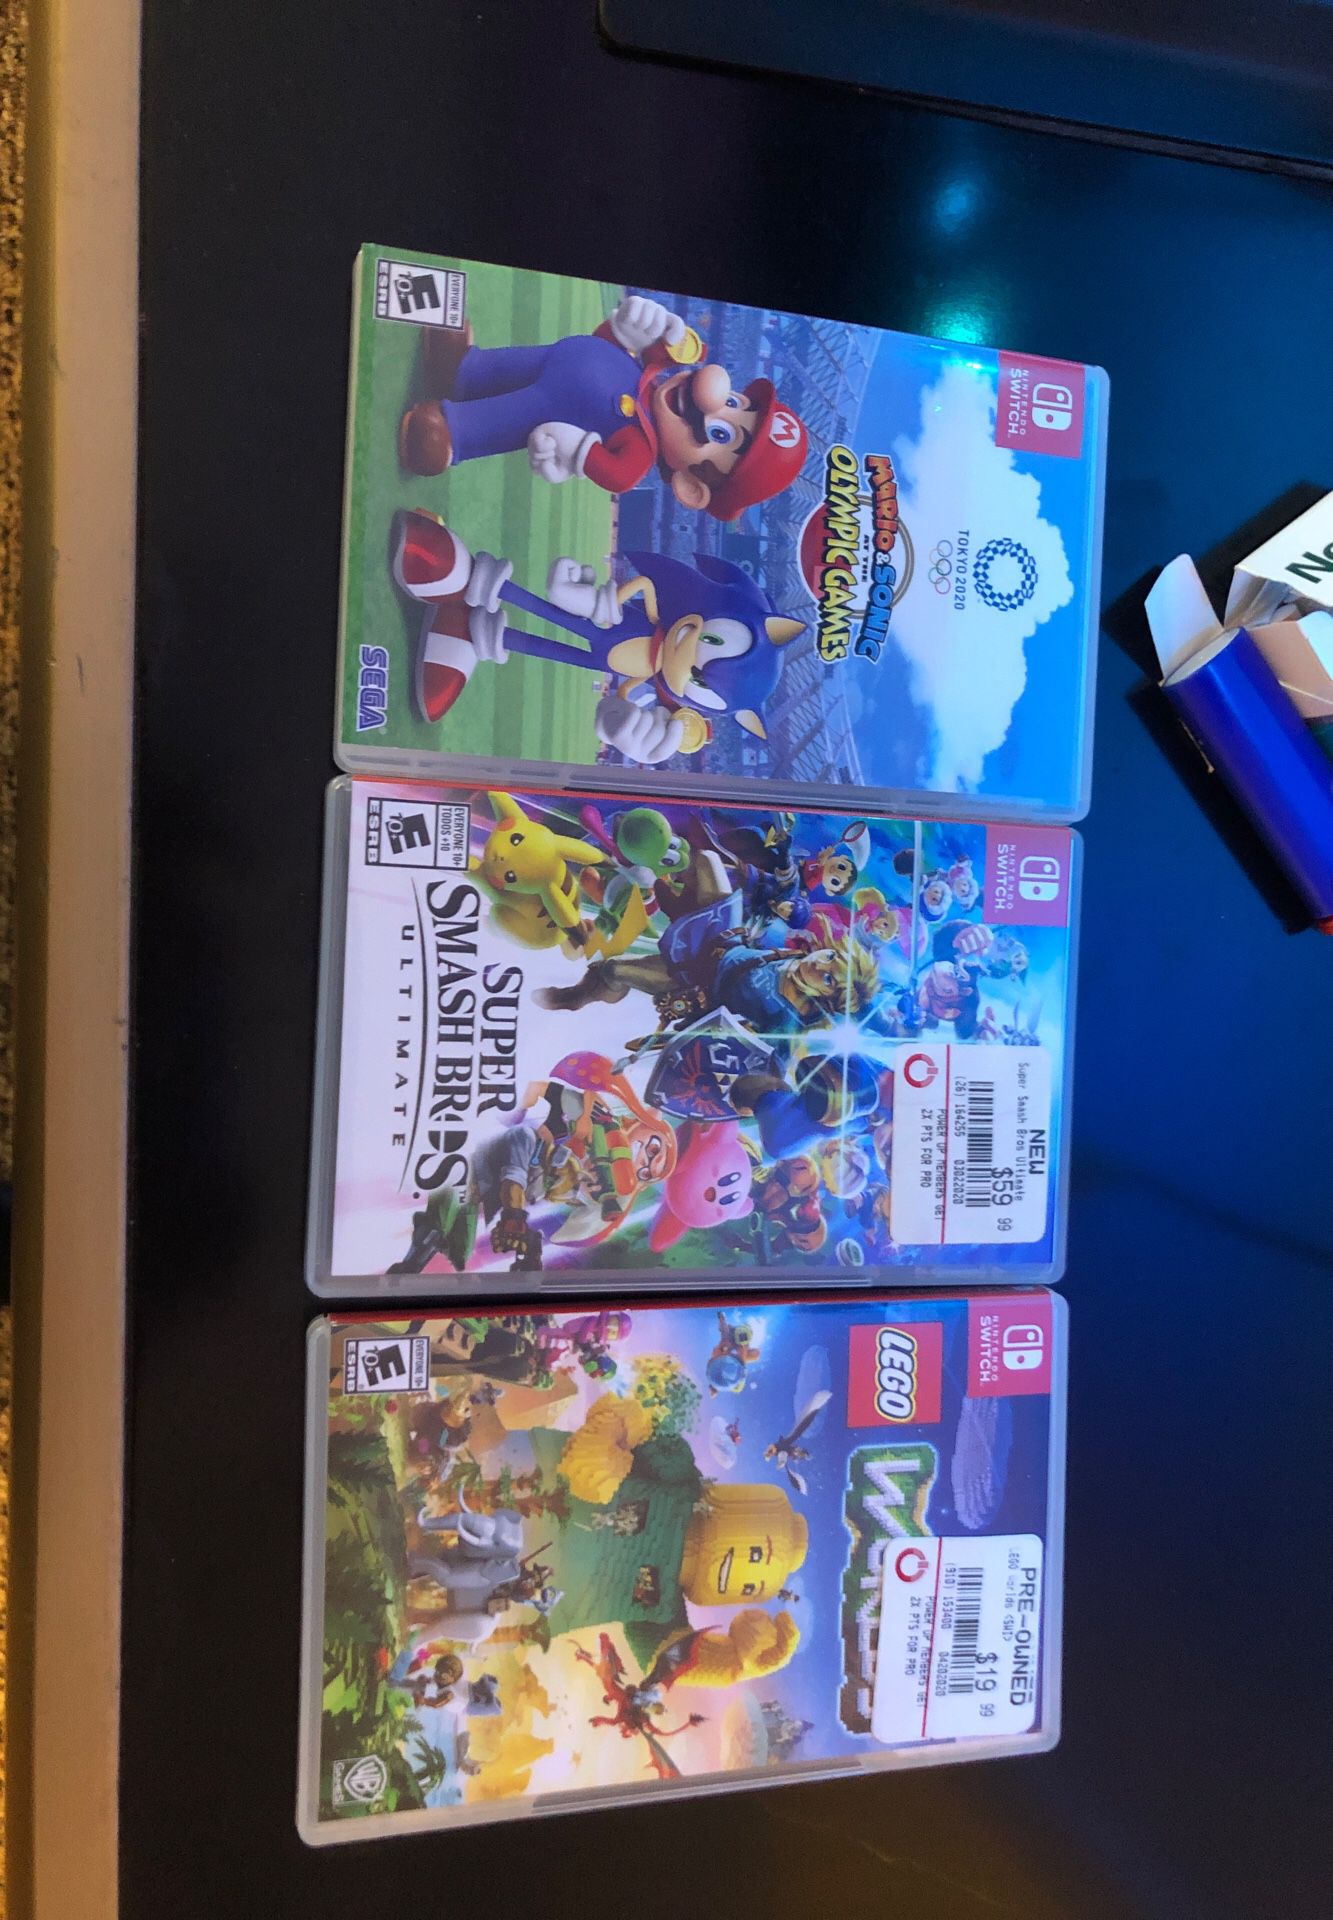 3 new Nintendo switch games ....super smash bros...Mario and sonic at the Olympic Games...and LEGO world